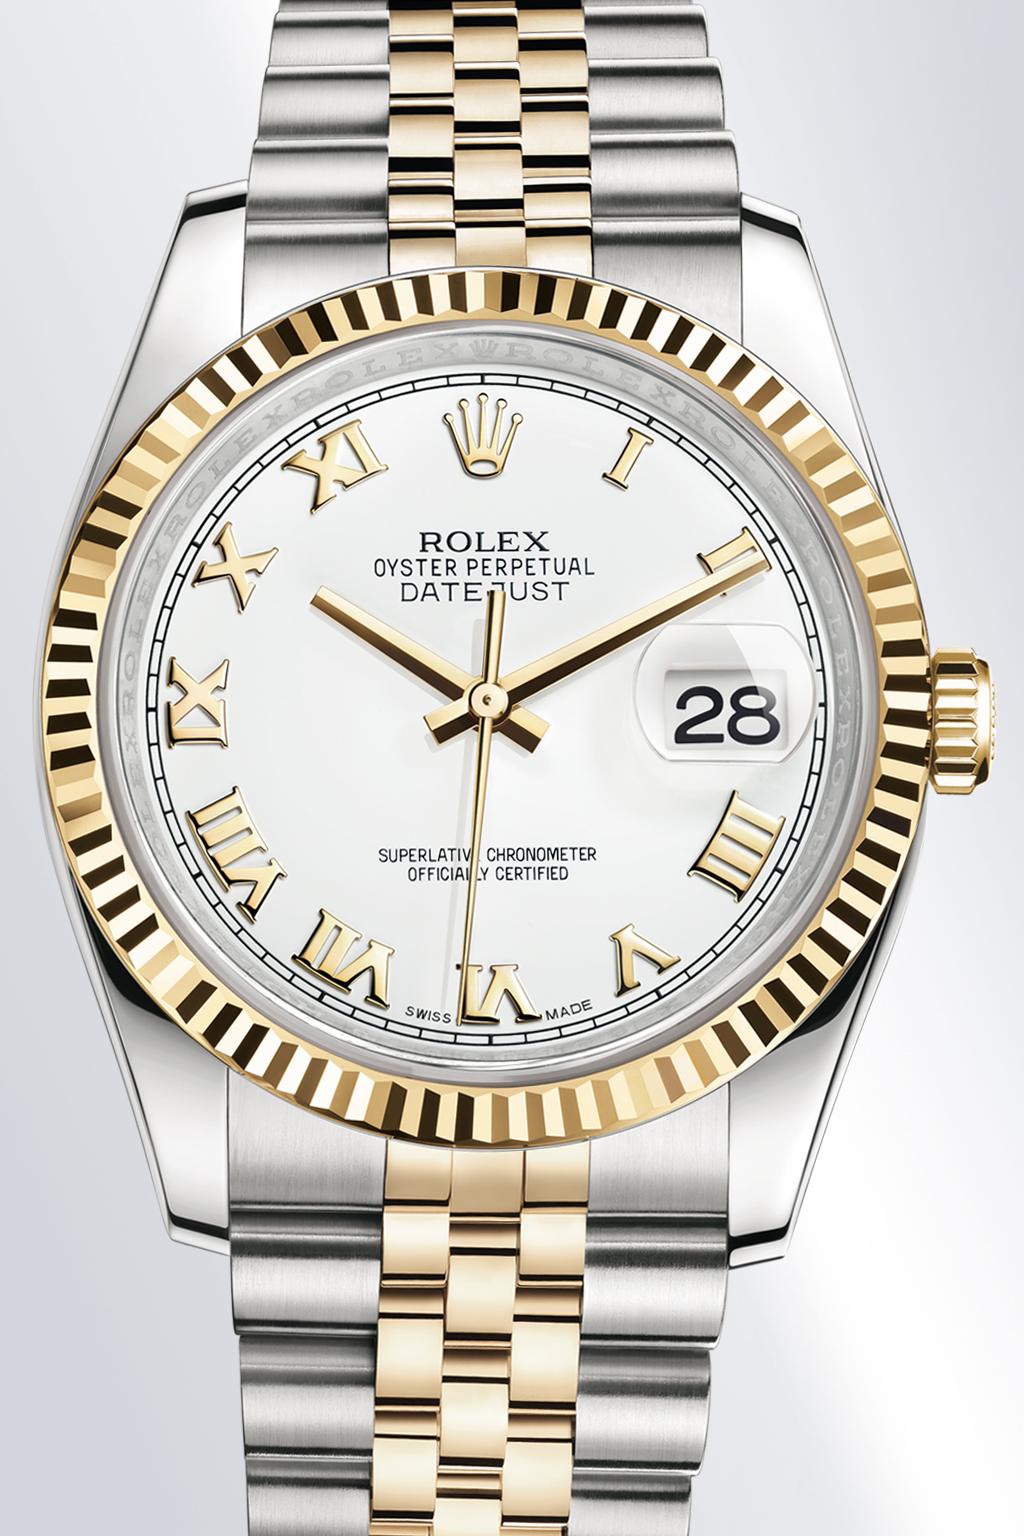 Style of the Datejust 36 THE CLASSIC WATCH OF REFERENCE The Datejust 36 is the modern archetype of the classic watch, thanks to aesthetics and functions that transcend changes in fashion.